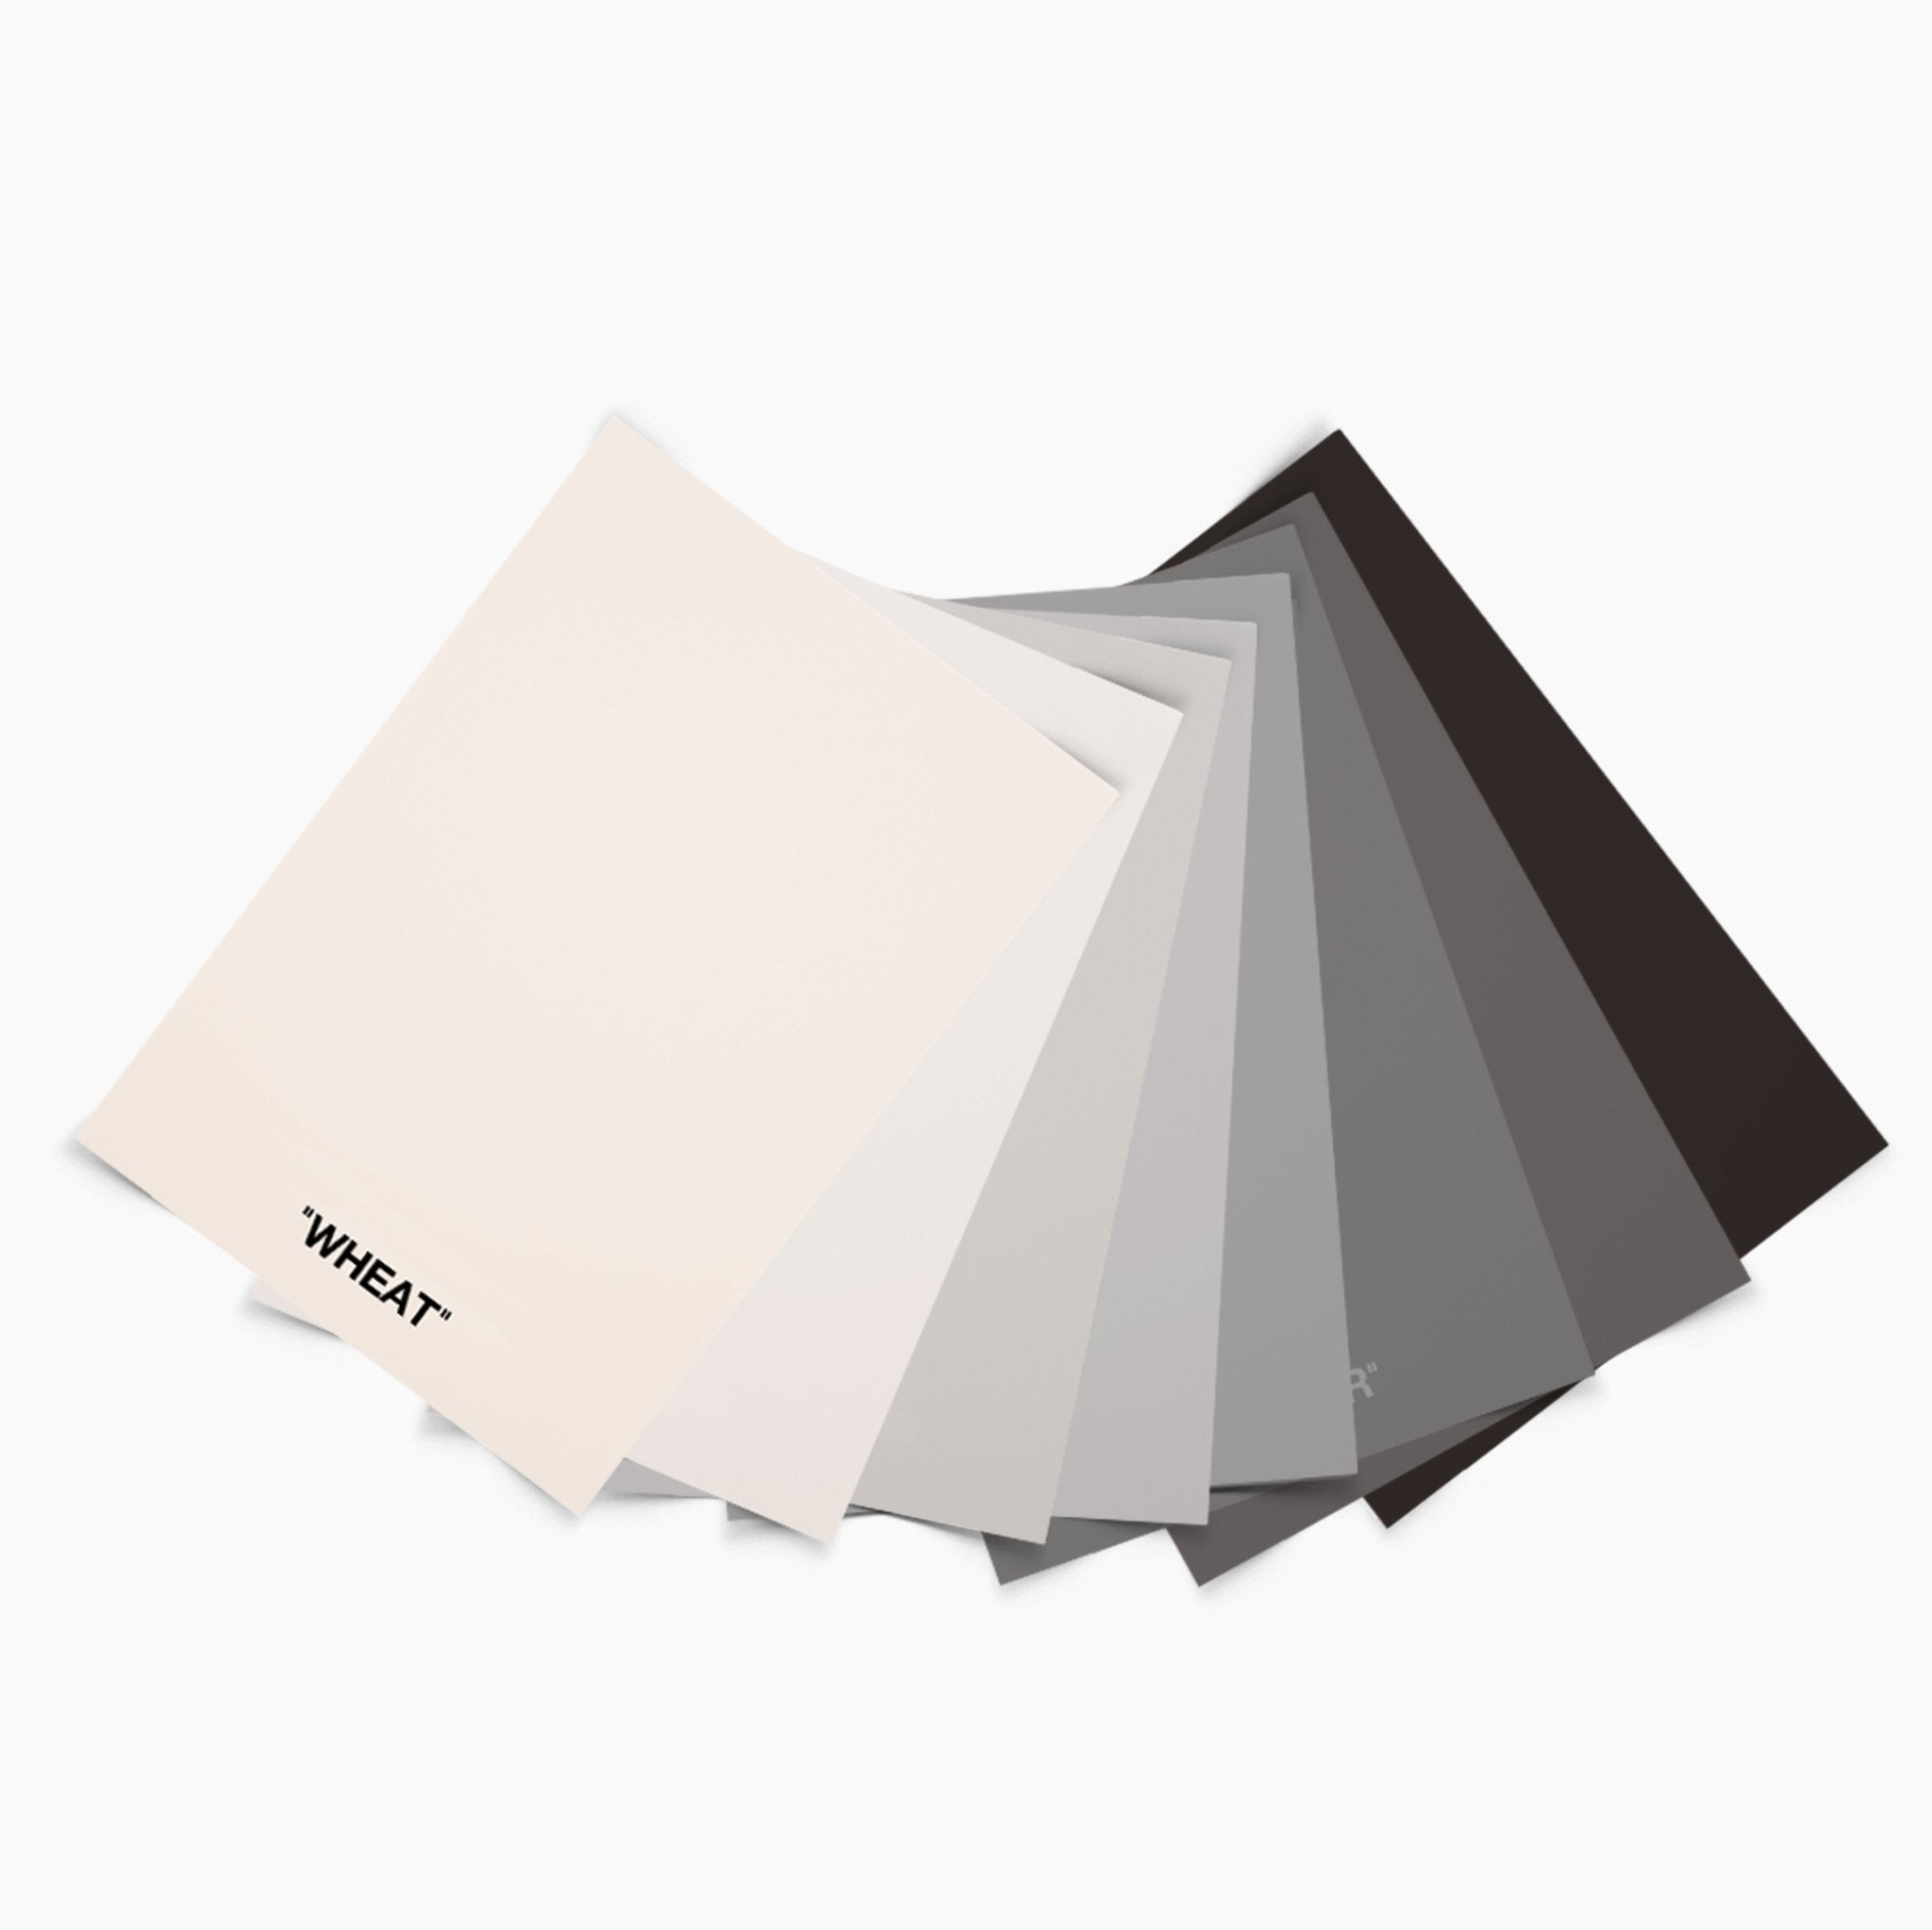 Sample pack - 8 Shades of Taupe